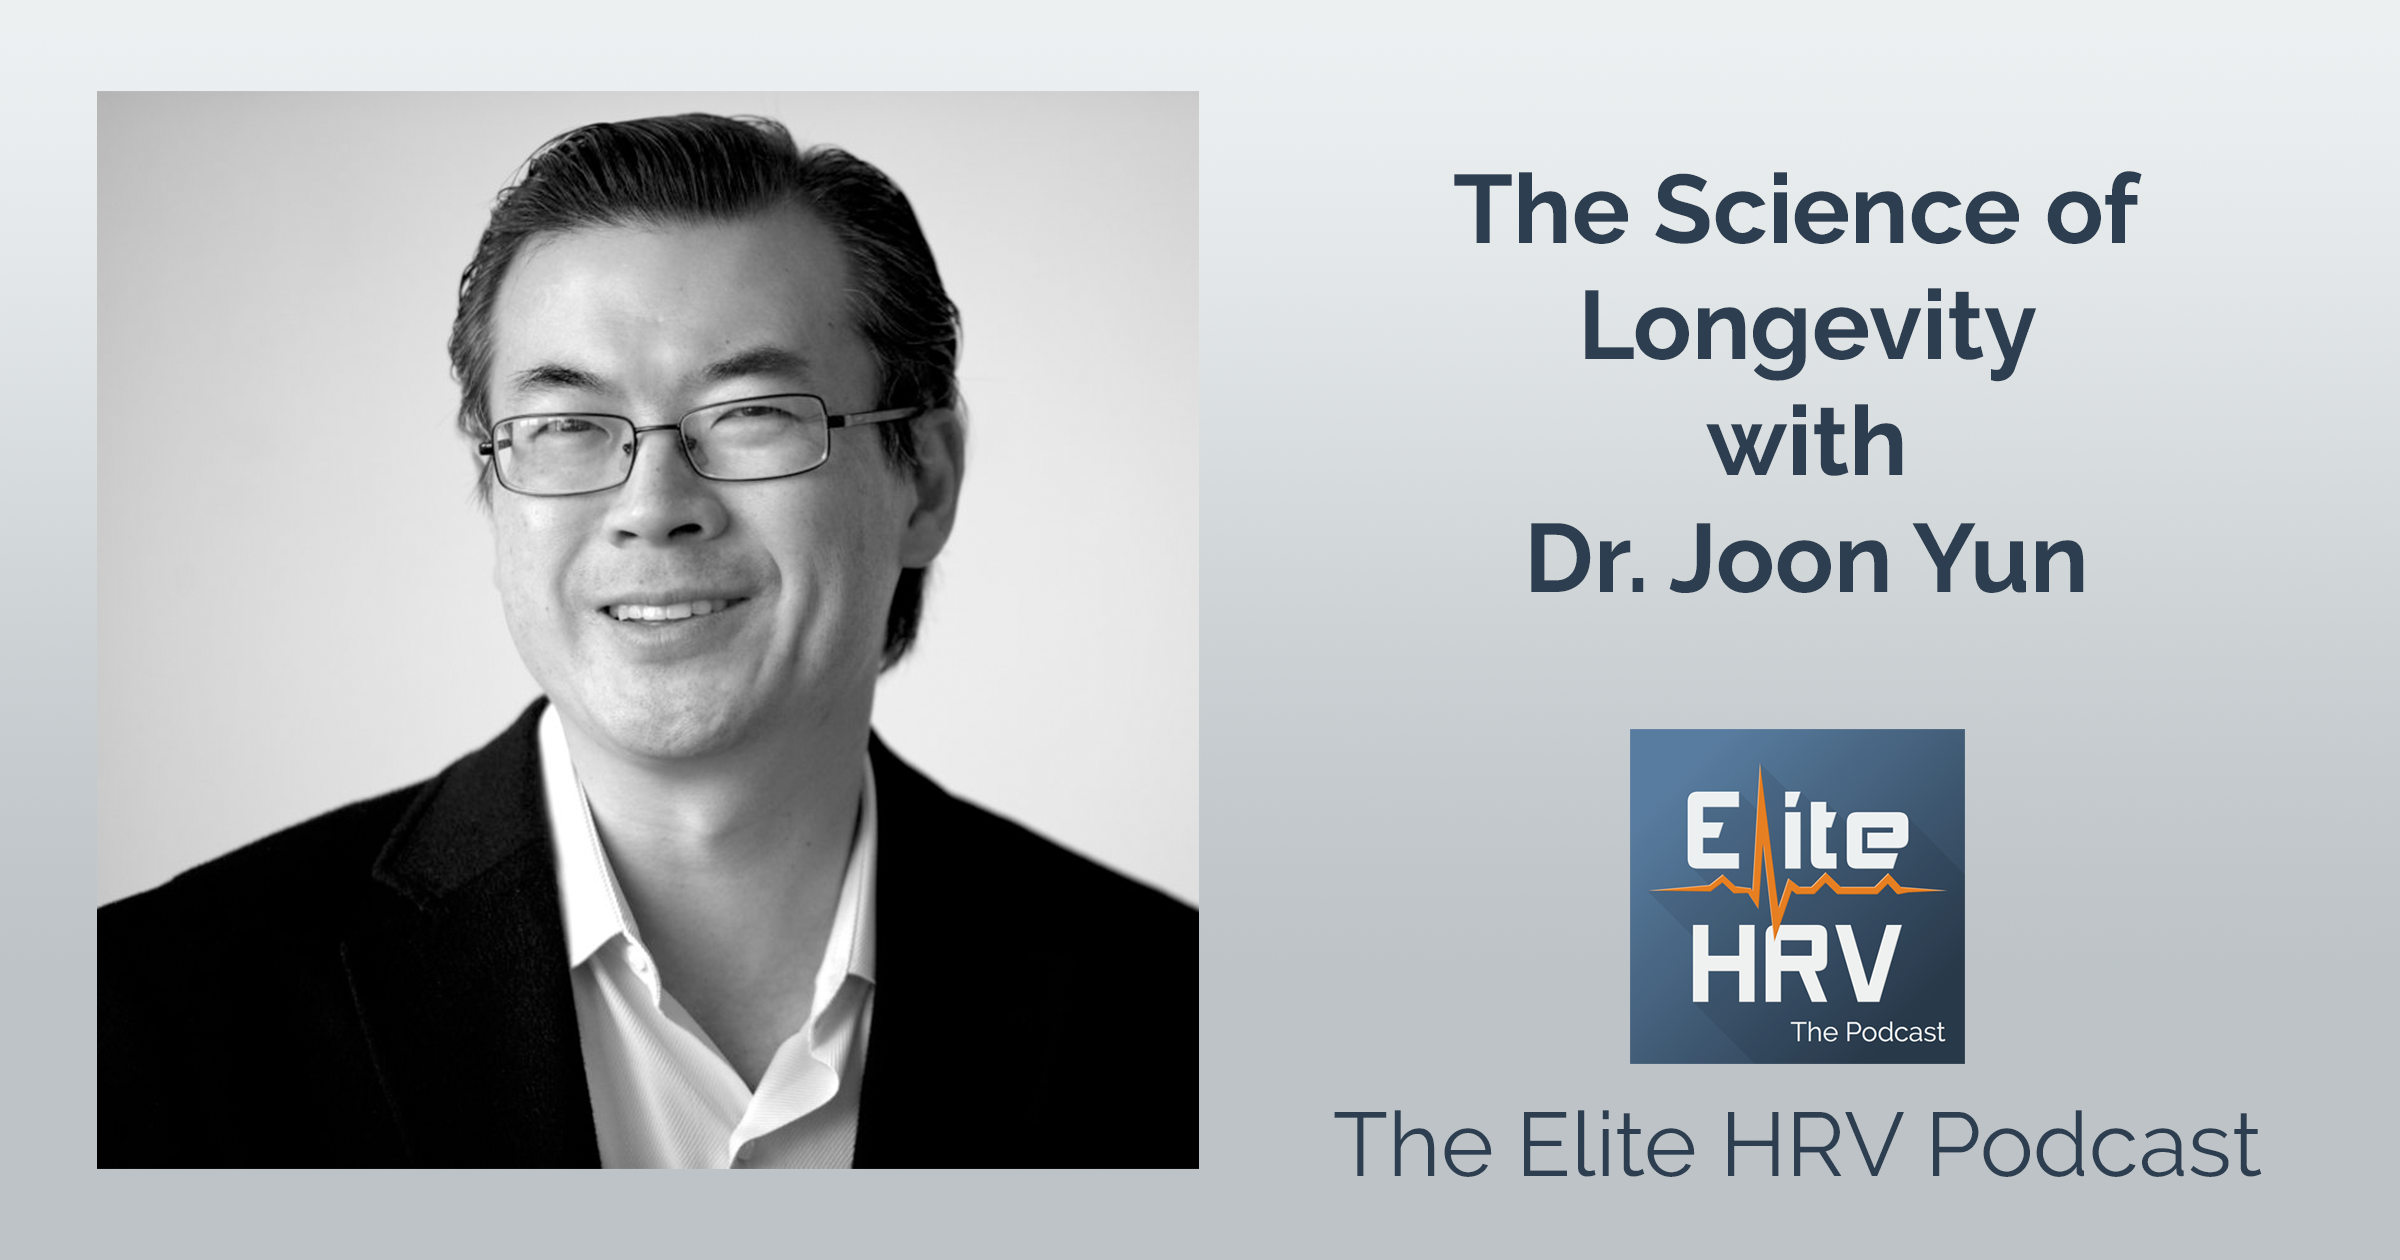 The Science of Longevity with Dr. Joon Yun